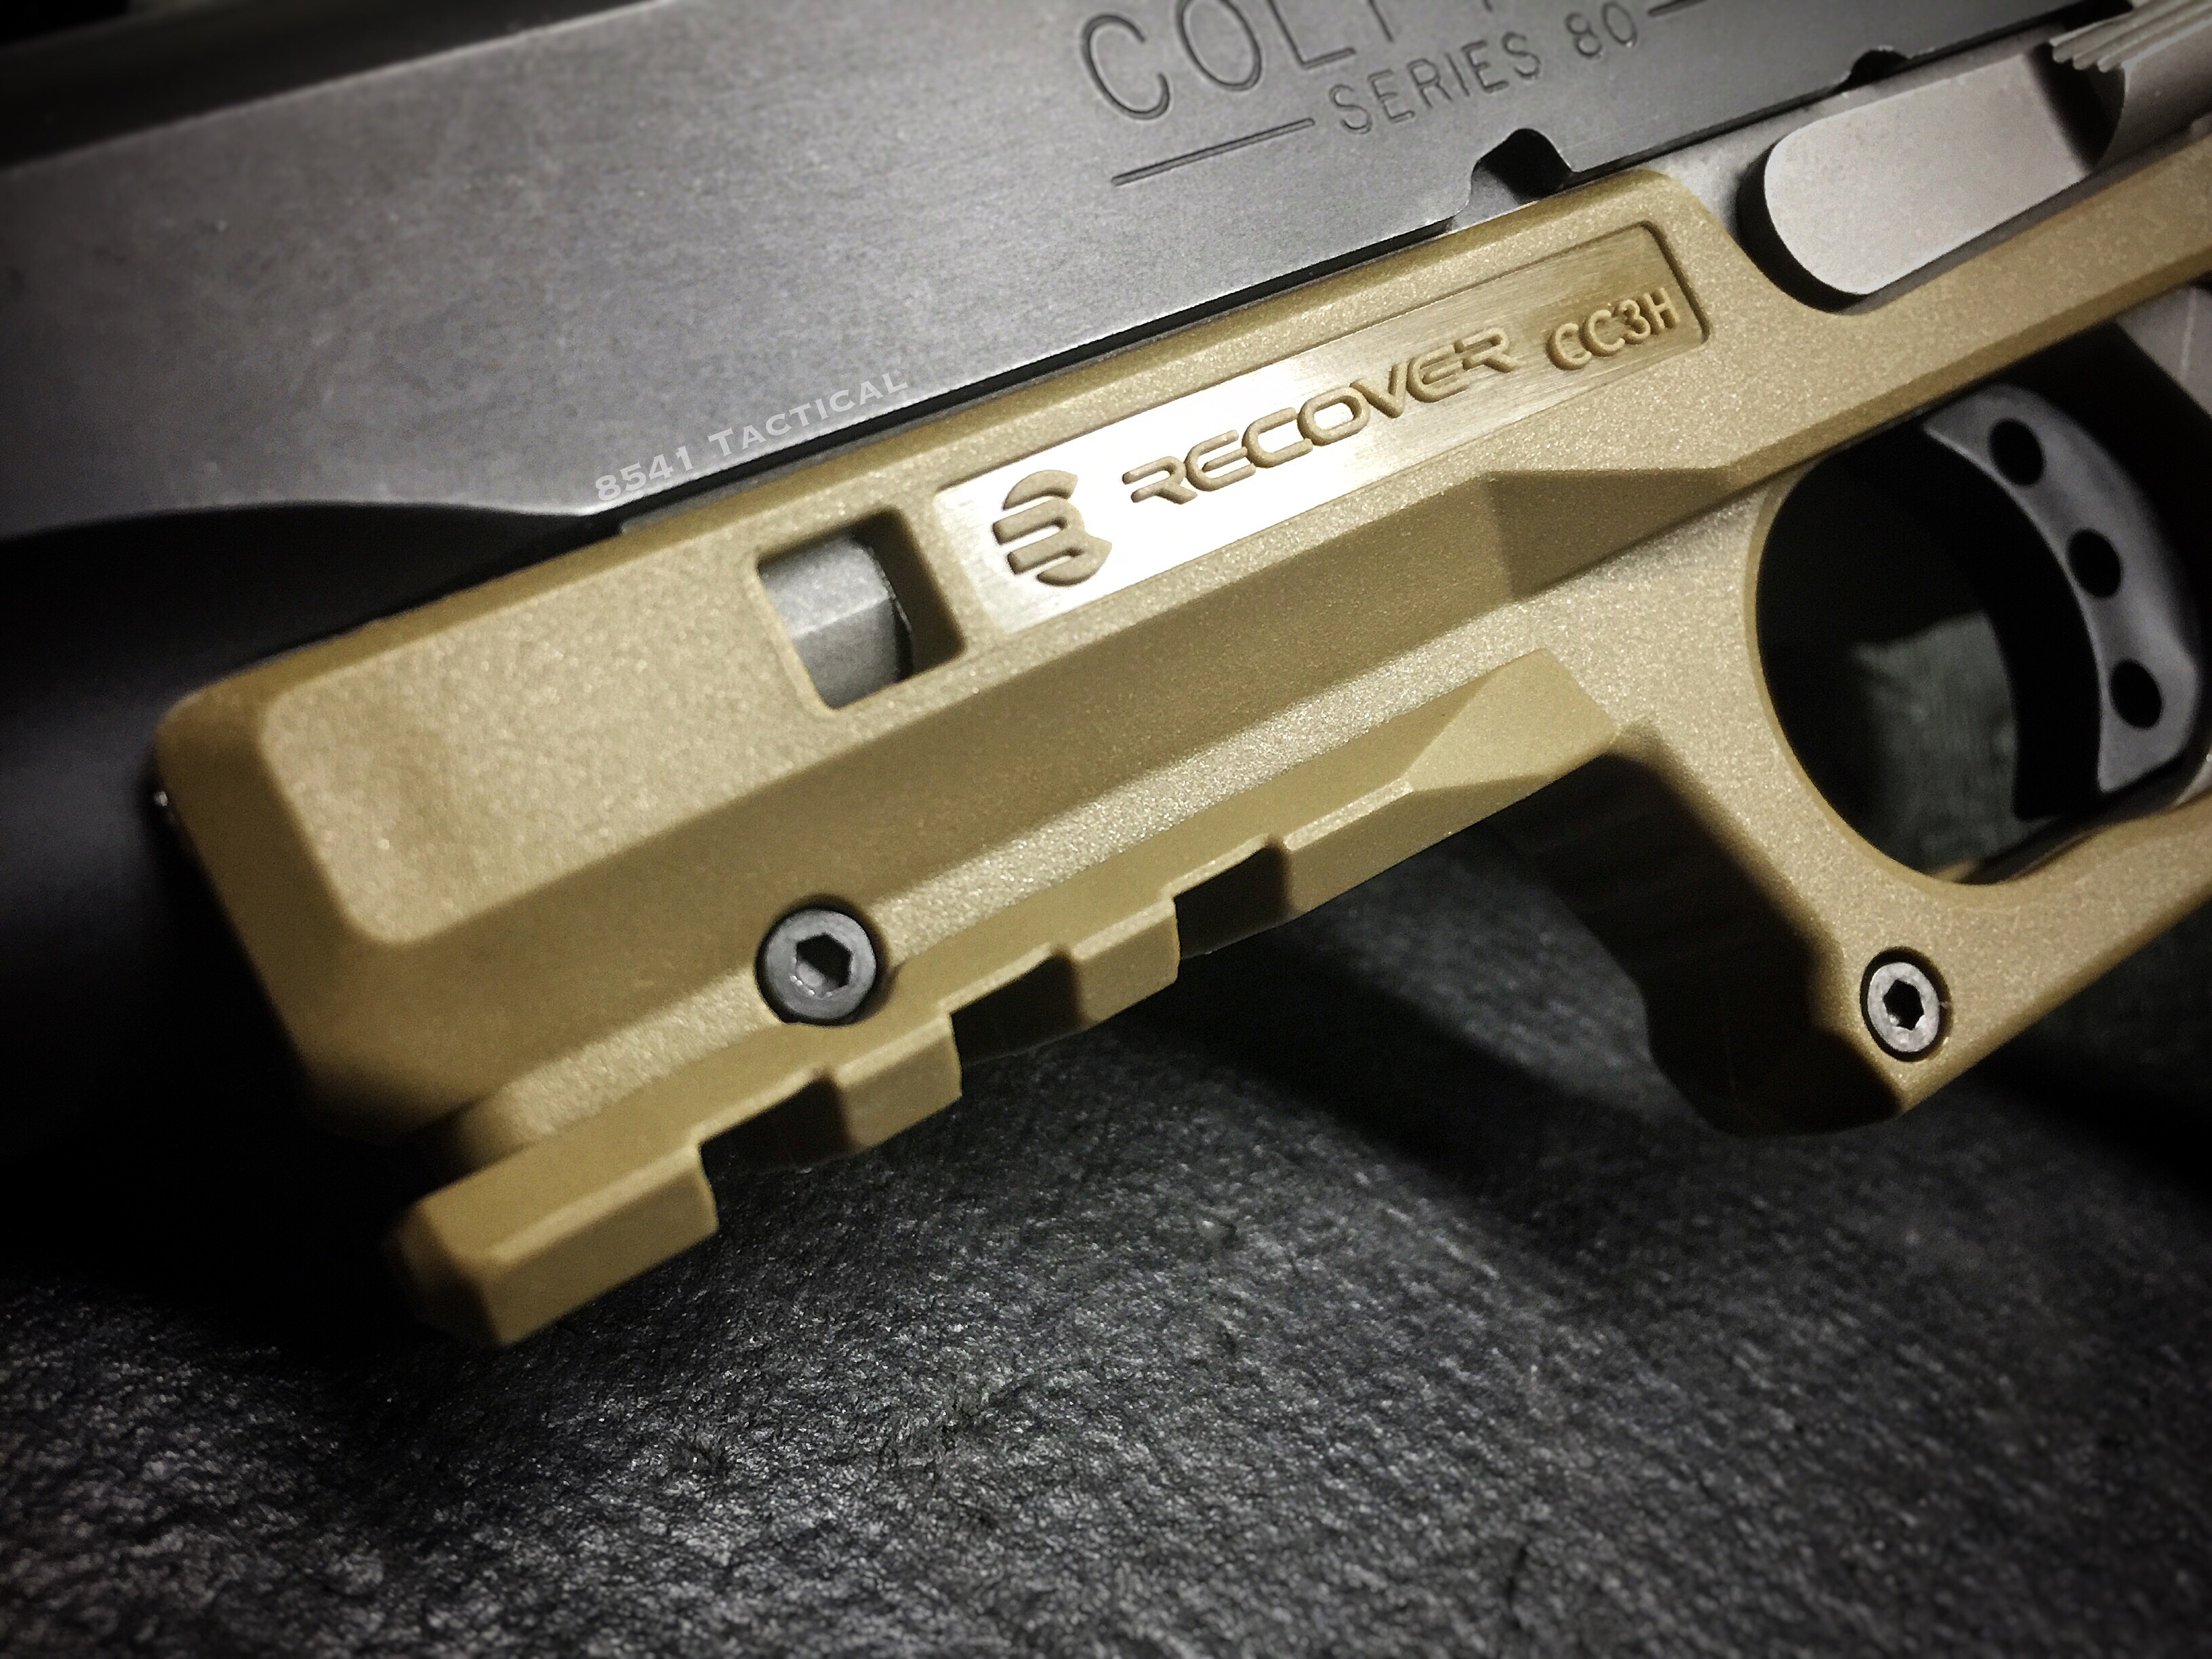 Recover Tactical CC3H 1911 Grip And Rail System 8541.